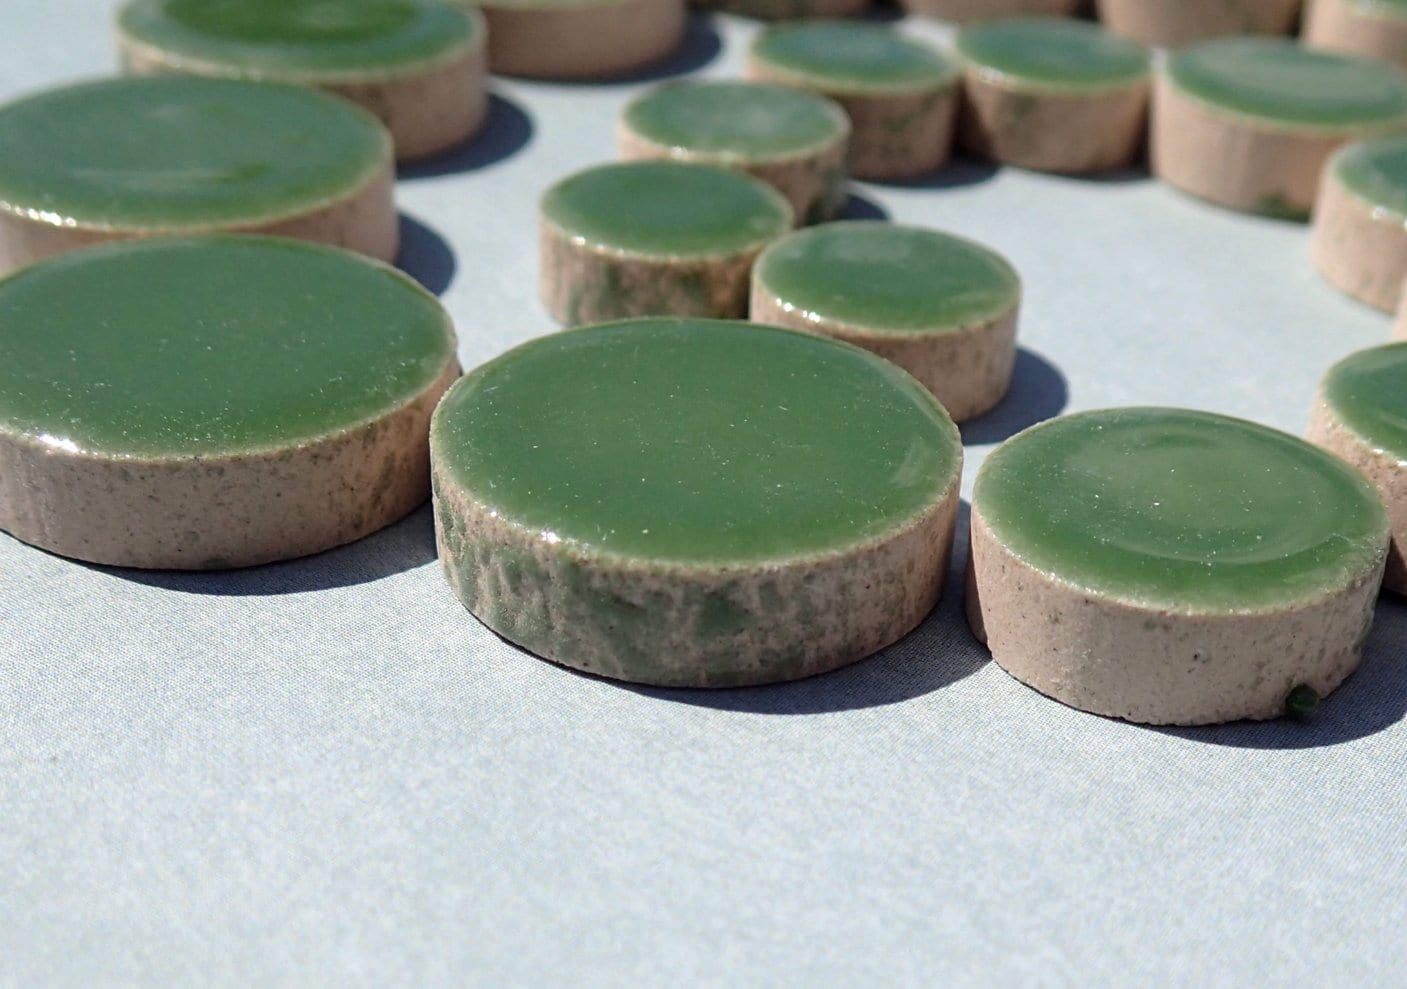 Eucalyptus Green Circles Mosaic Tiles - 50g Ceramic in Mix of 3 Sizes 1/2" and 3/4" and 5/8"